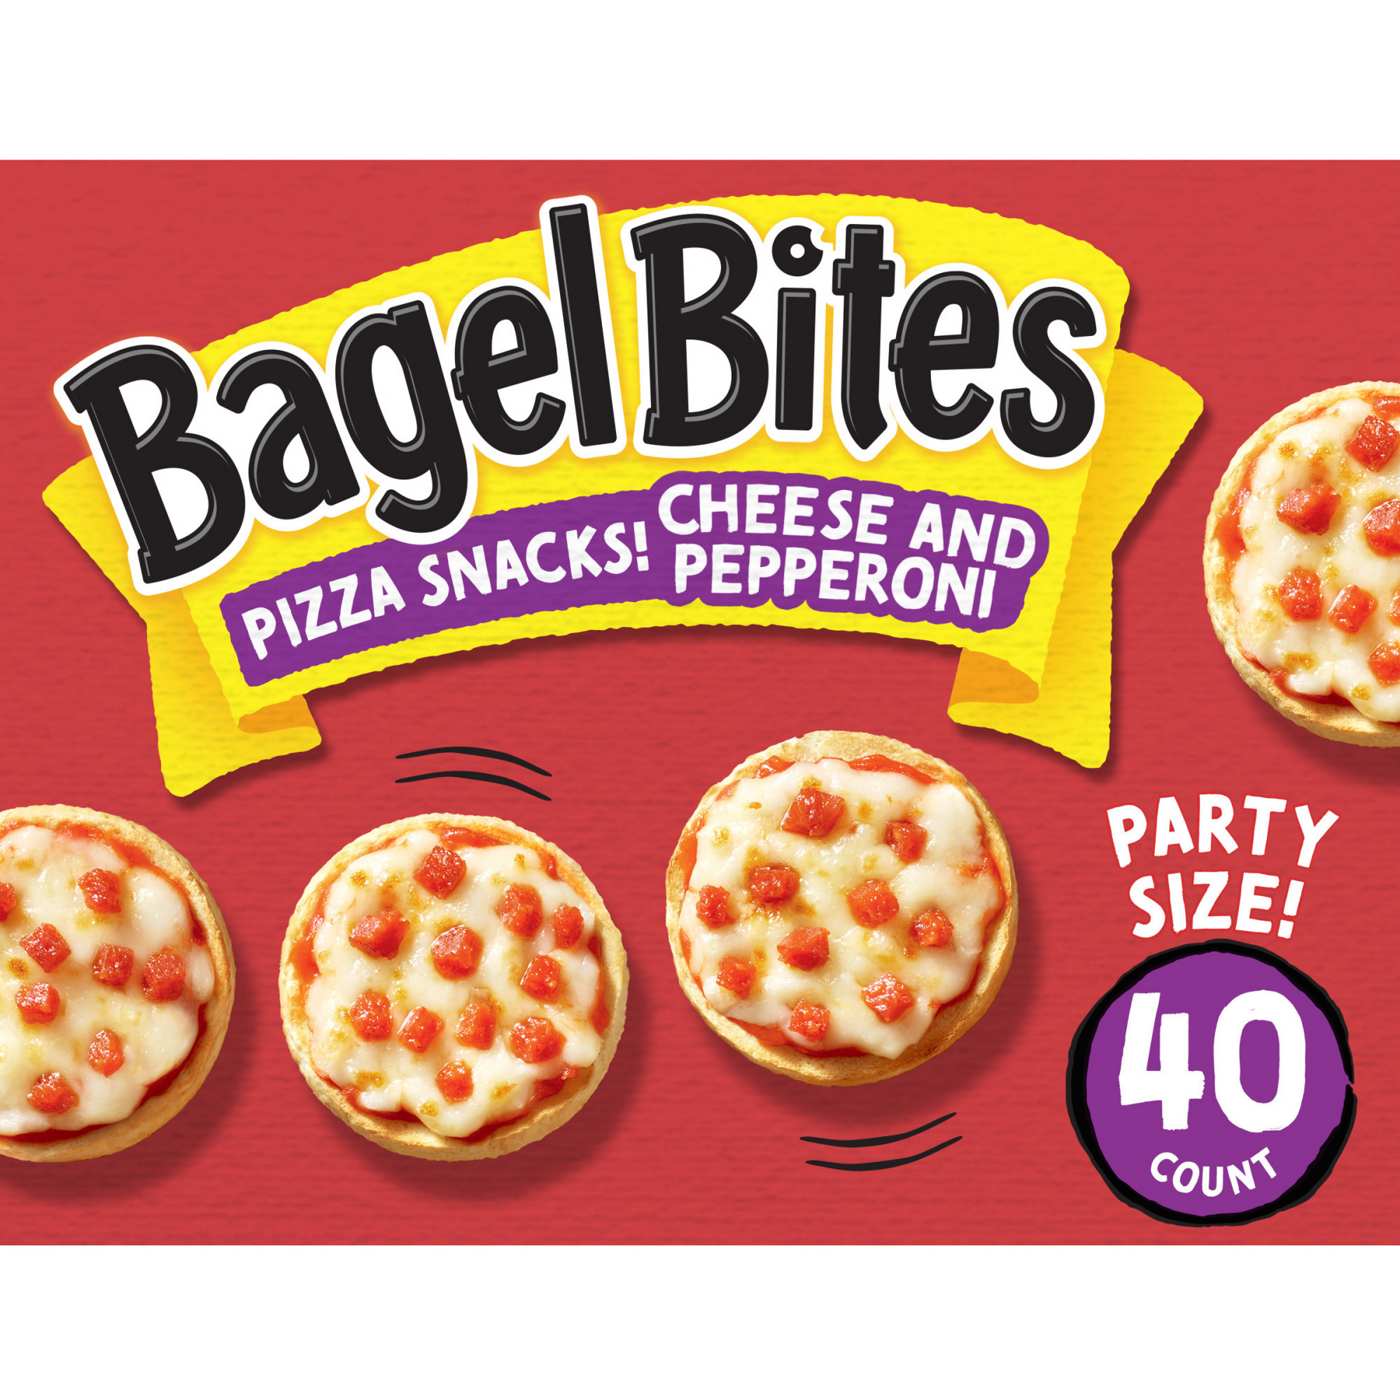 Bagel Bites Frozen Cheese & Pepperoni Pizza Snacks - Party Size; image 1 of 9